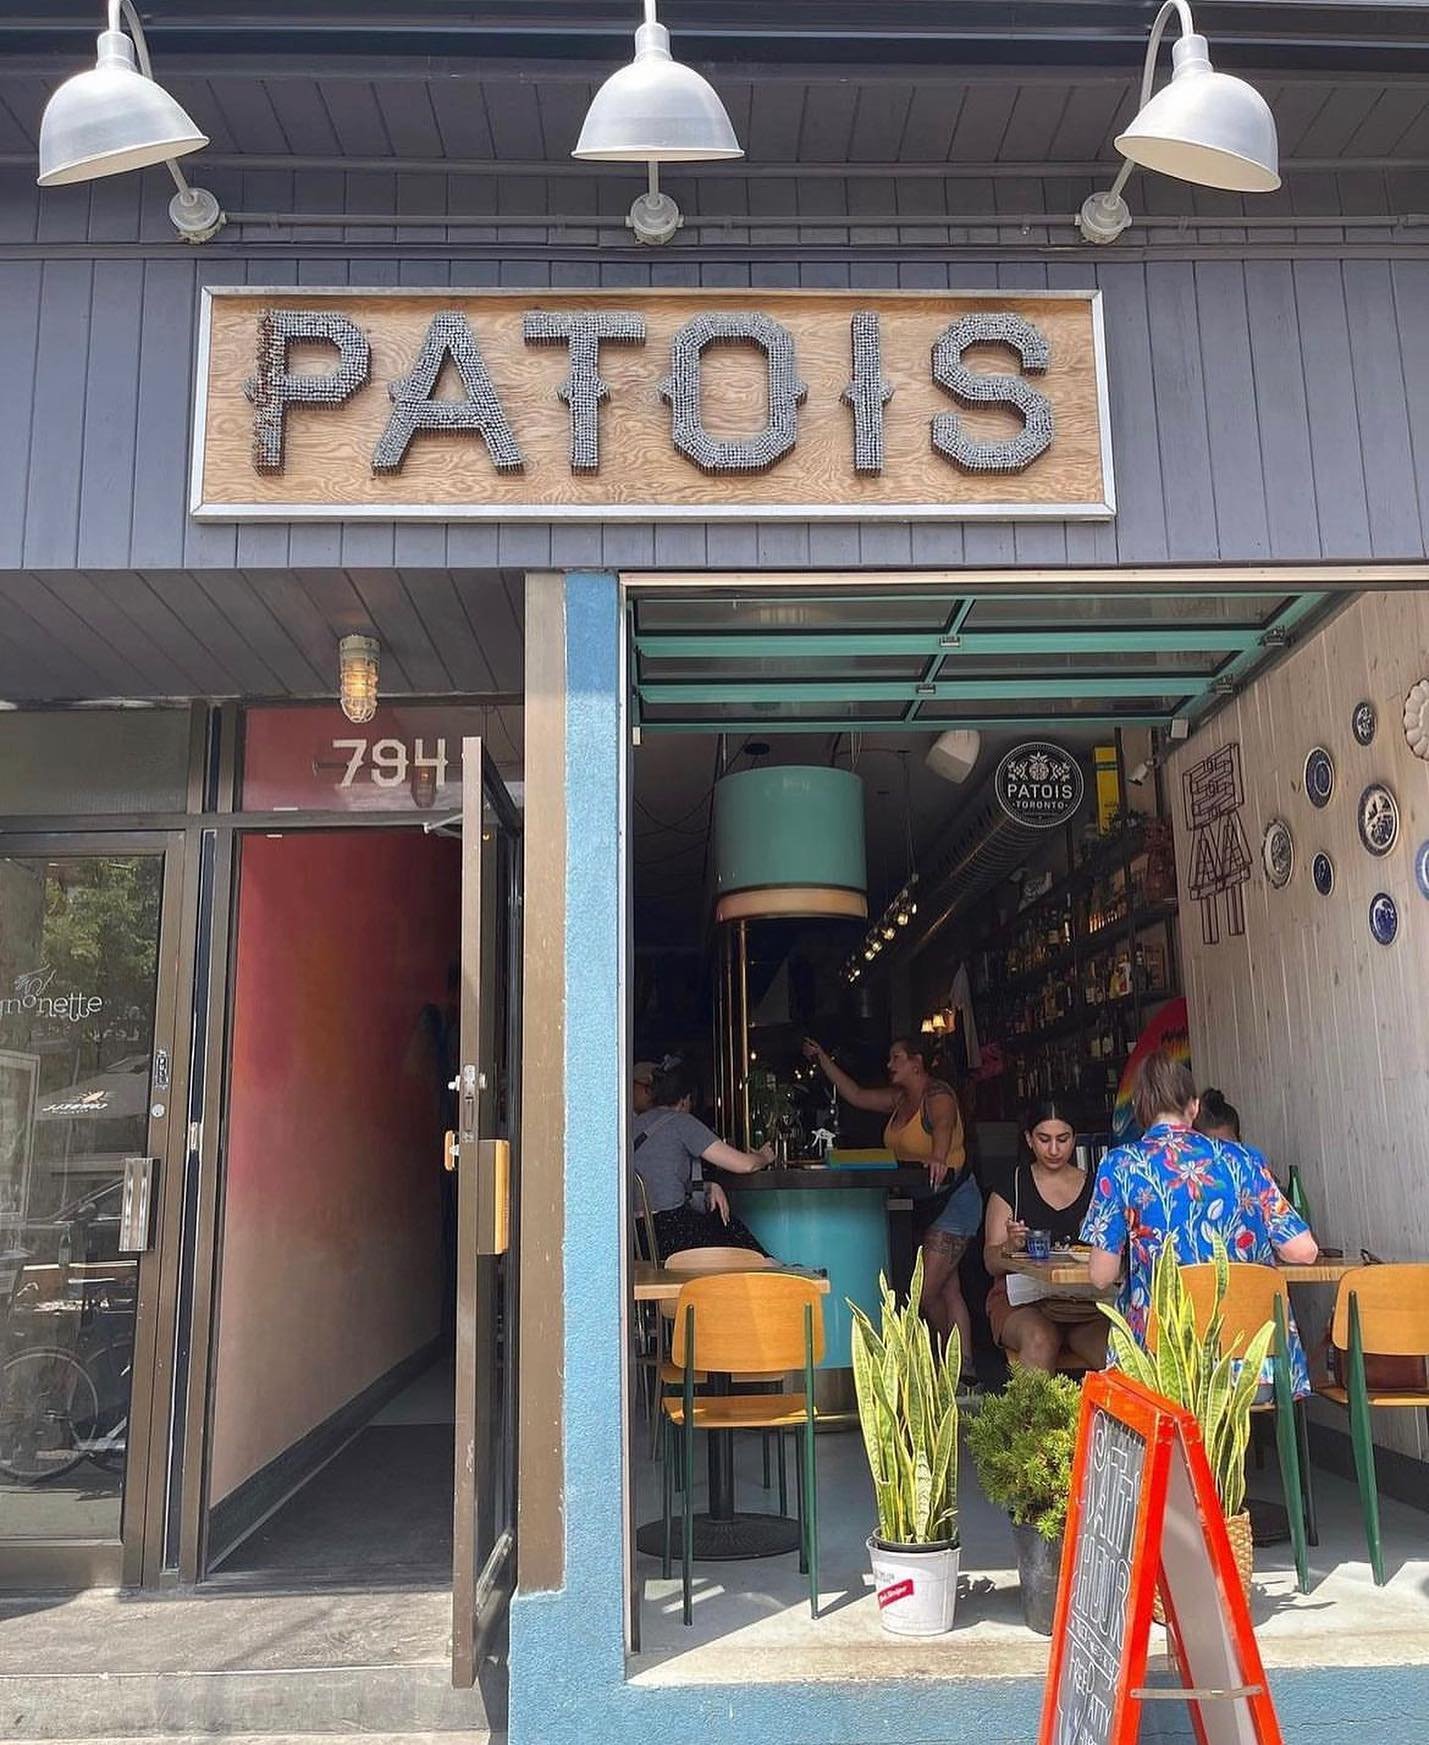 SUN IS OUT AND WE&rsquo;RE FEELING FINEEE 😎

Patio szn is coming! Let&rsquo;s toast tonight 🥂

Book your table at patoistoronto.com 

#patoistoronto #warmweather #yum #patois #torontoeats #patioszn #patio